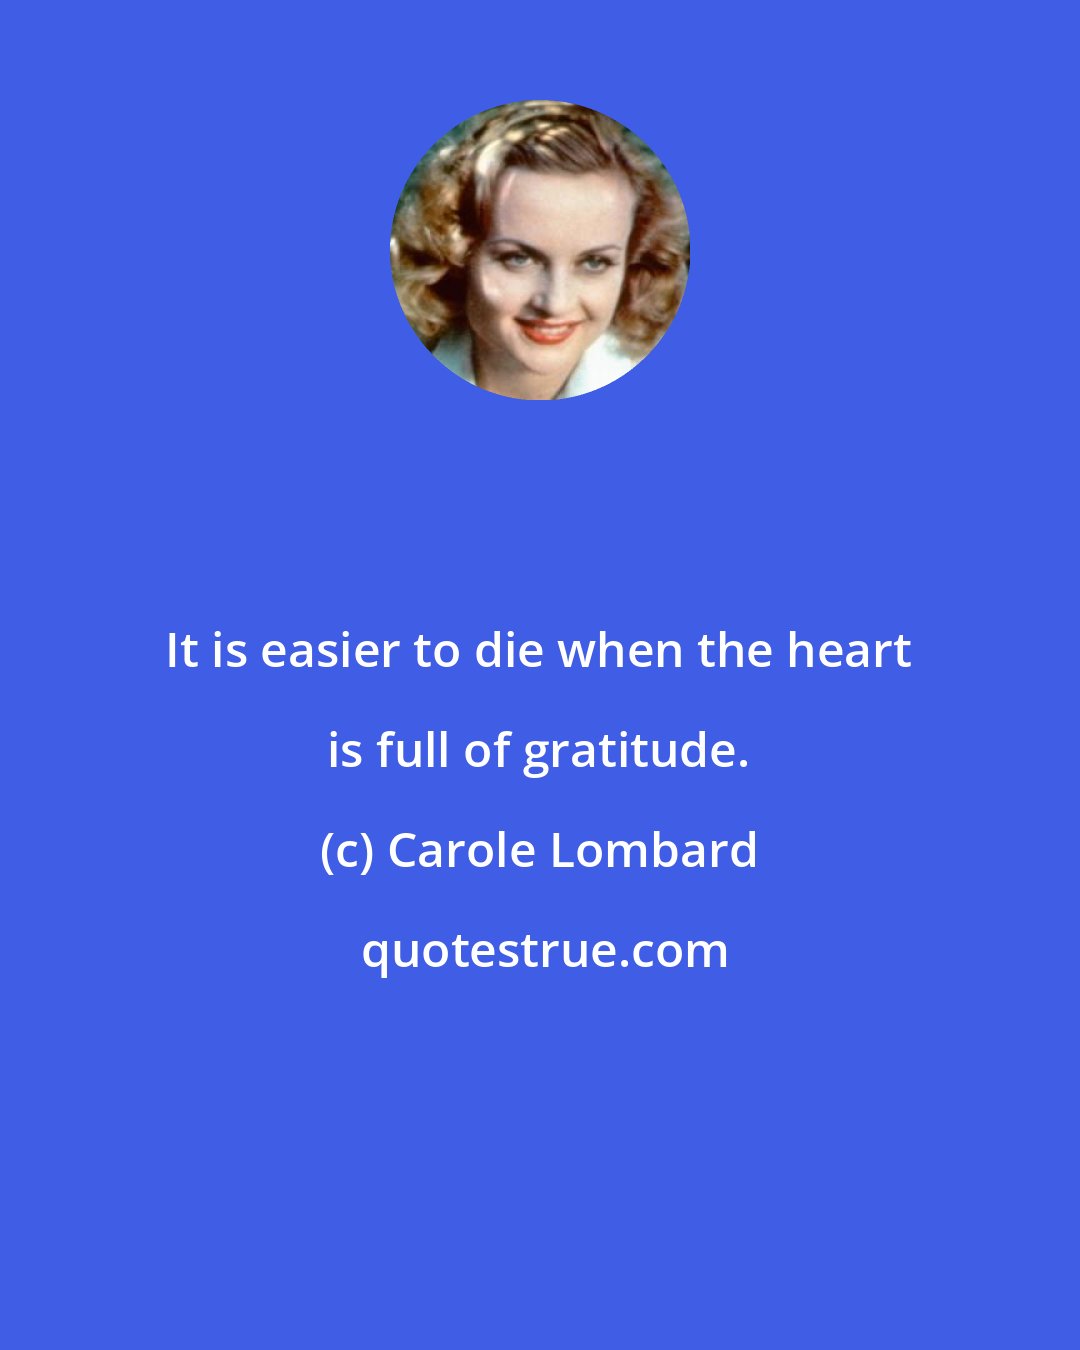 Carole Lombard: It is easier to die when the heart is full of gratitude.